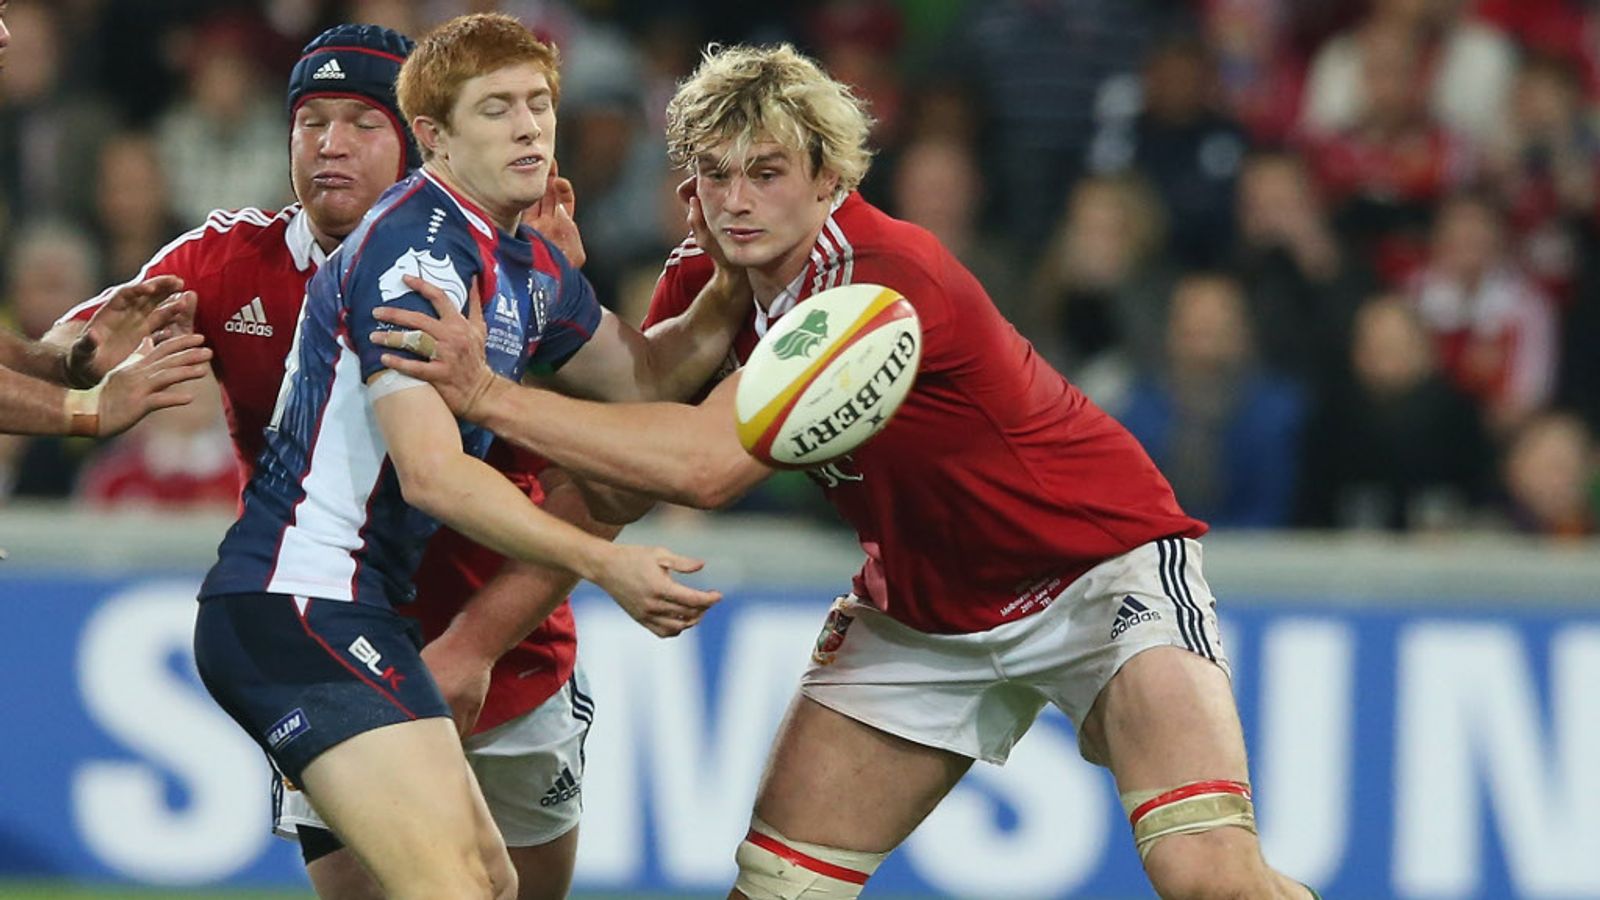 Match Preview Rebels vs Hurricanes 09 May 2014